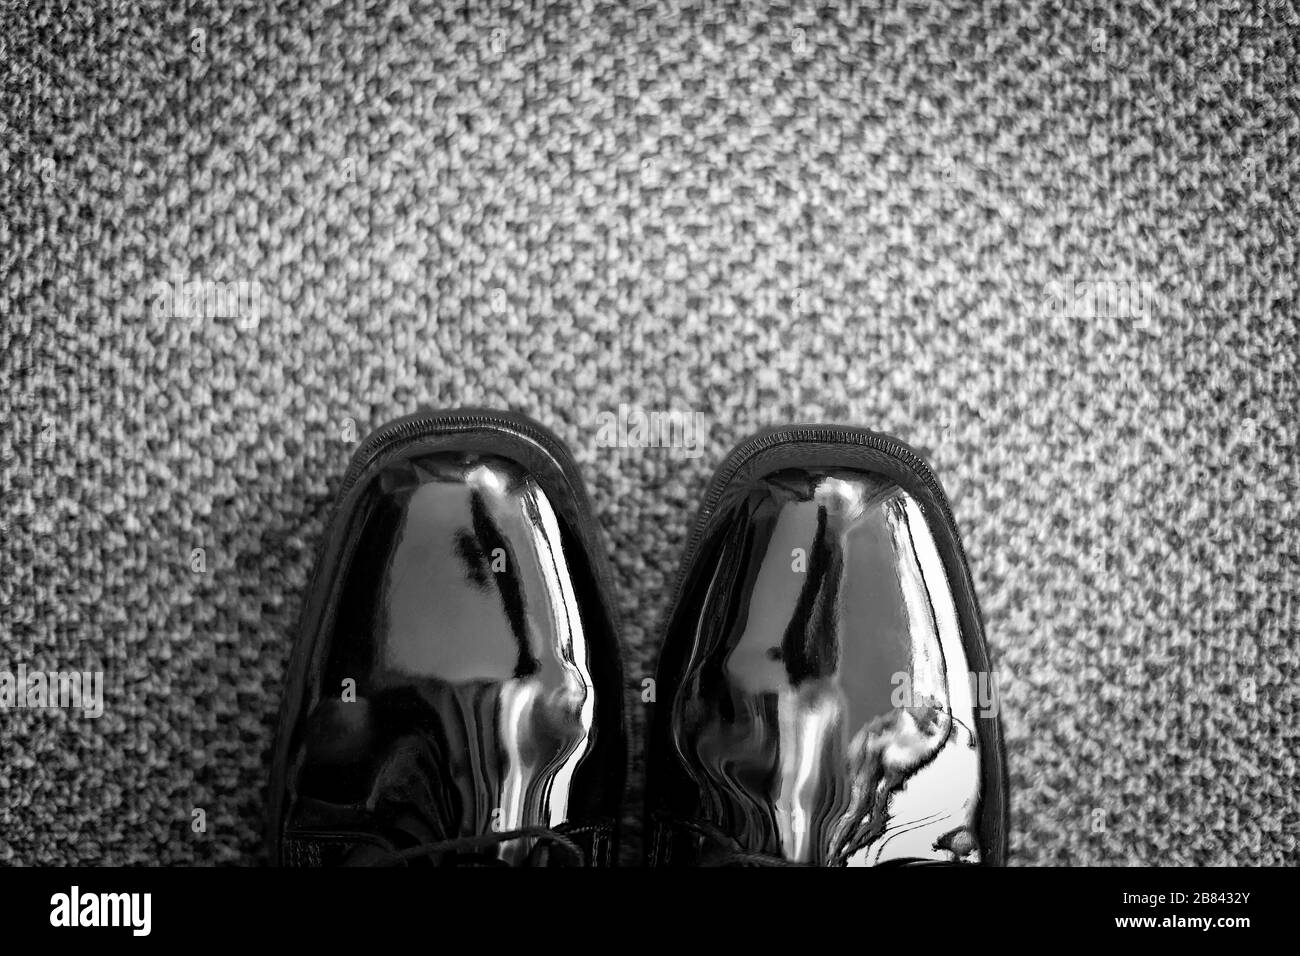 Black and whte textured and patterned carpet with pantent leather shoes seen from above Stock Photo